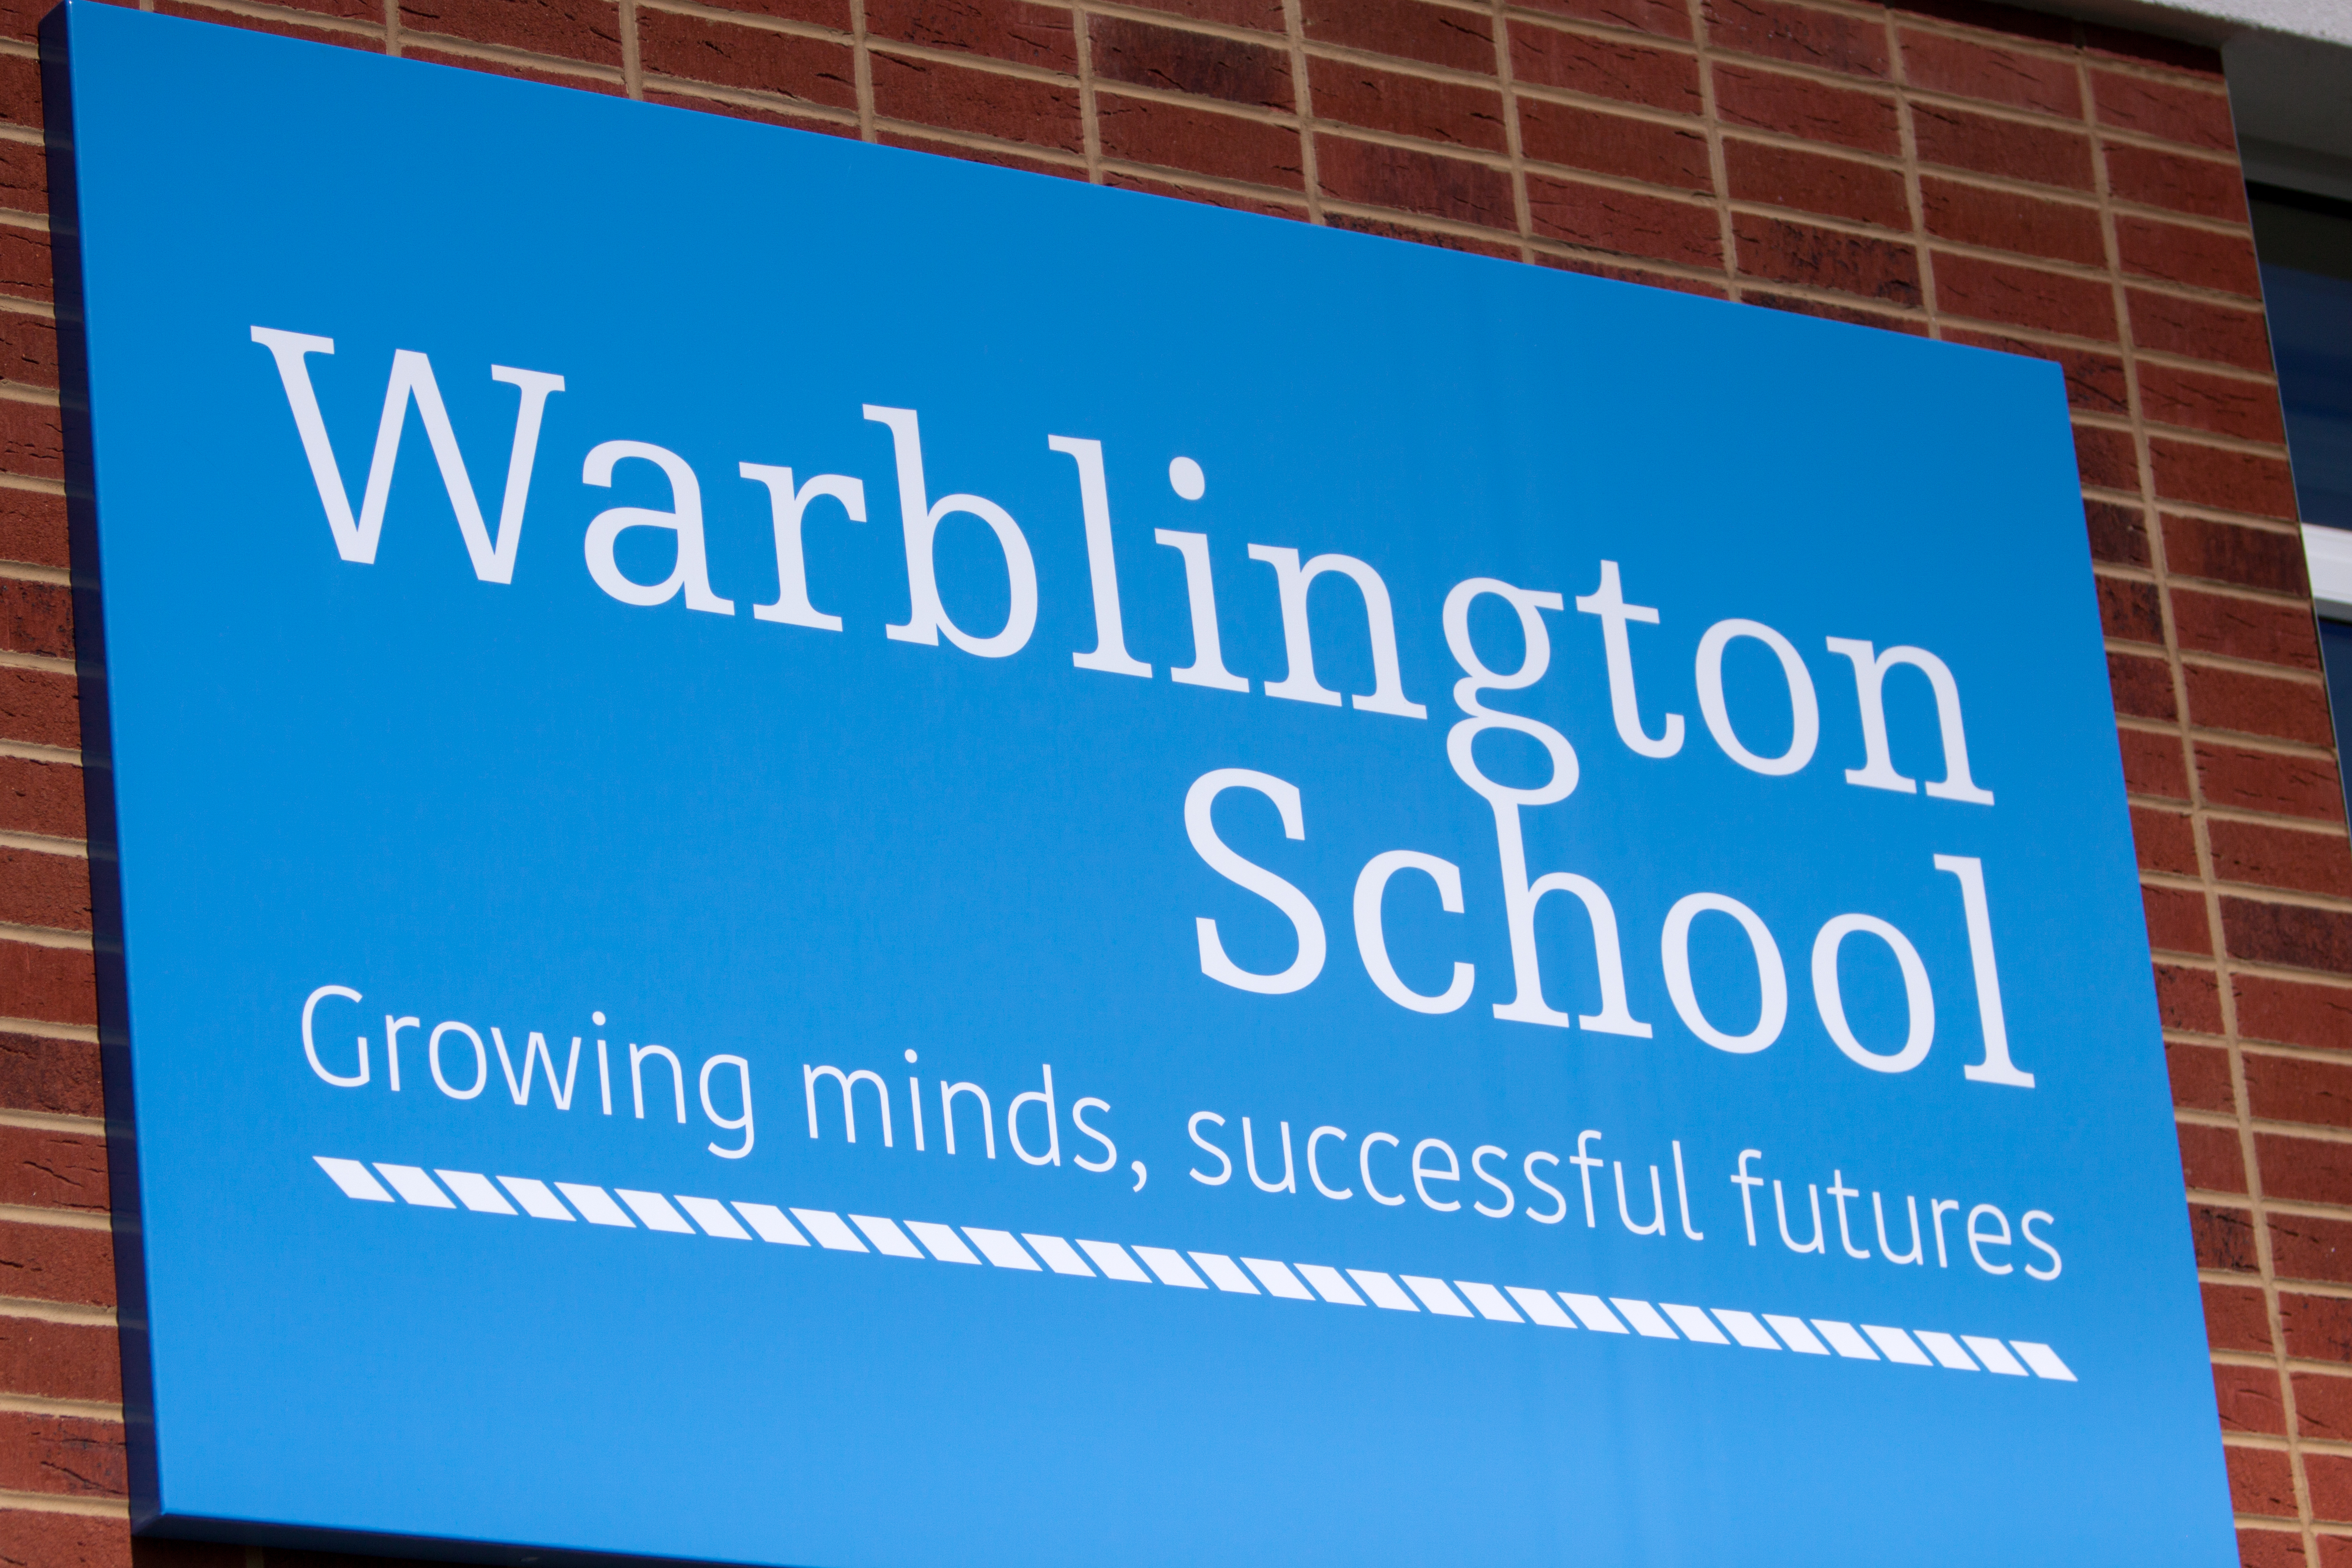 Plan For The Wider Re-opening Of Warblington School